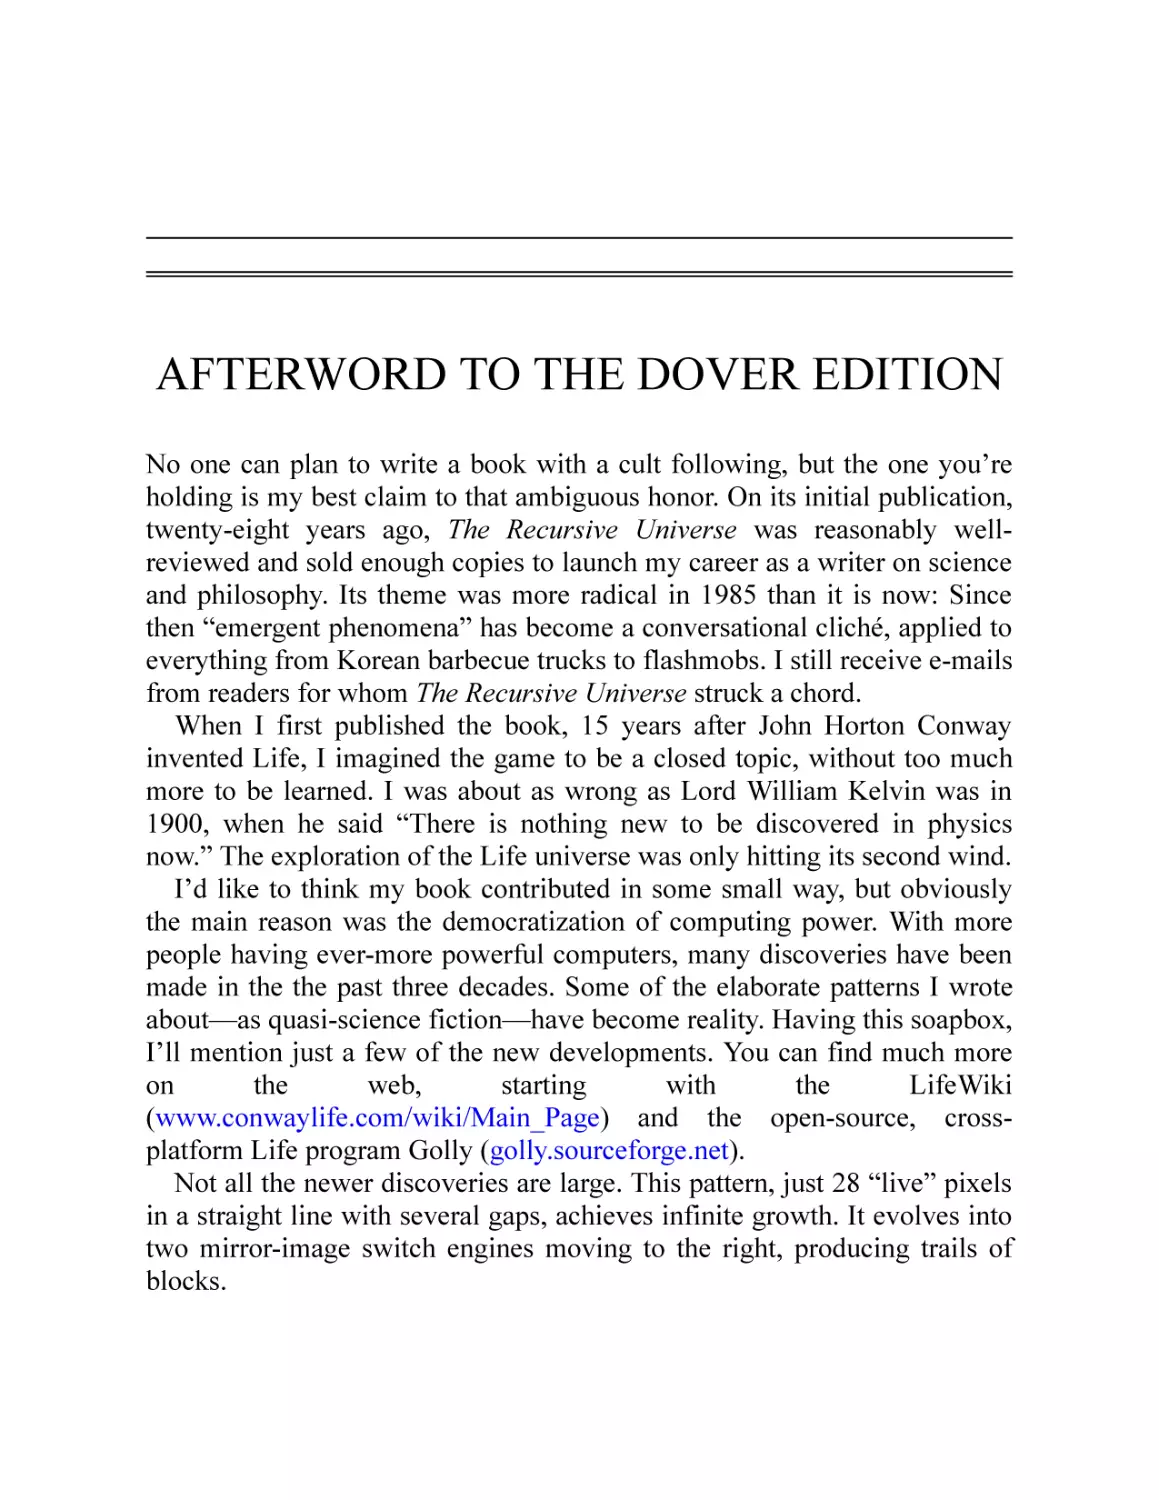 Afterword to the Dover Edition